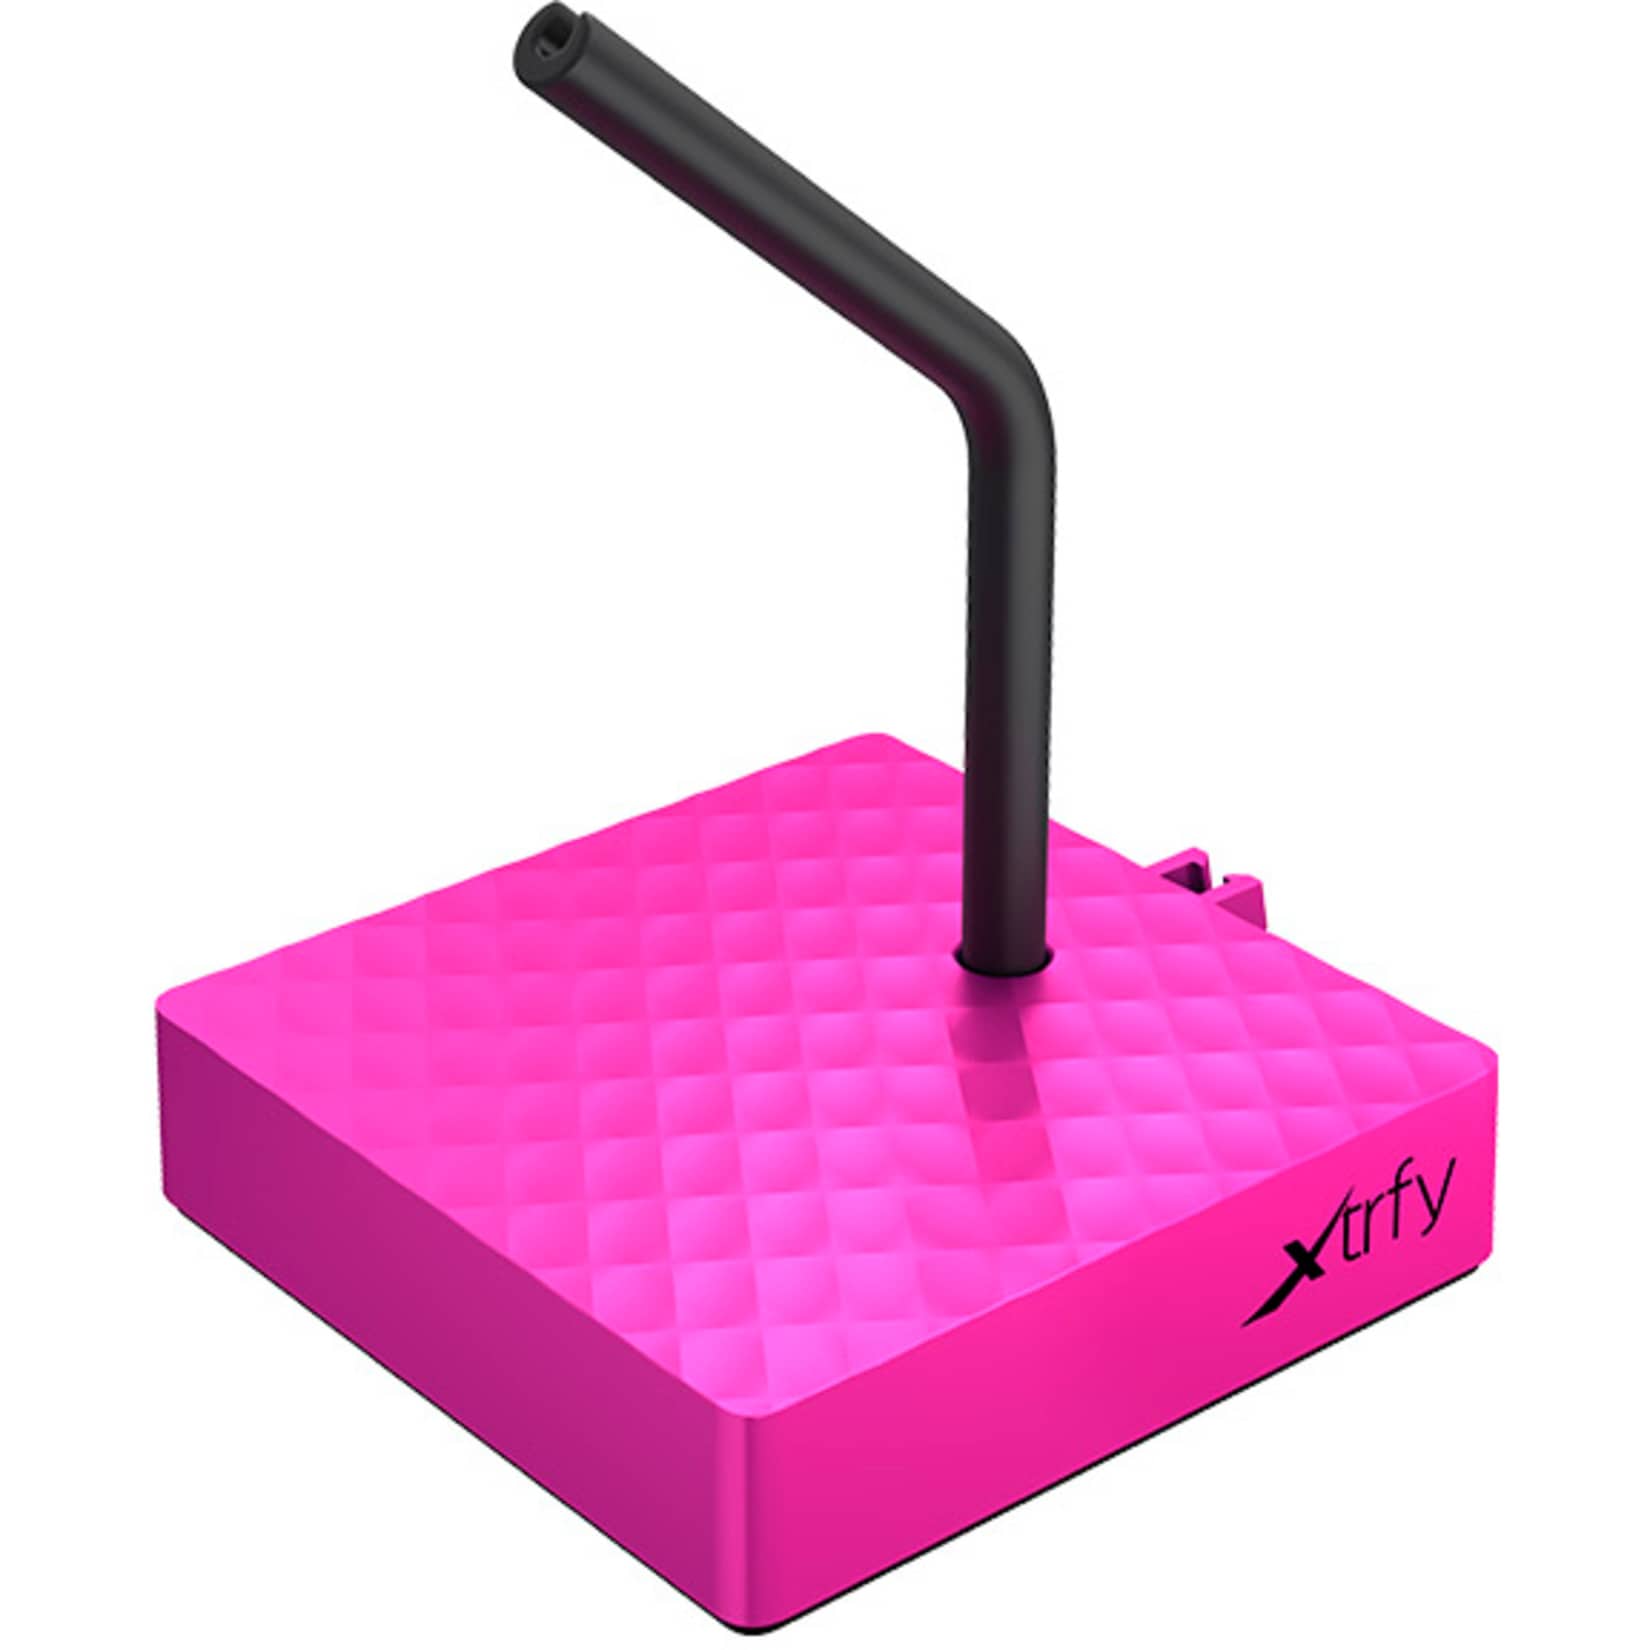 Cherry Maushalter Xtrfy B4 Mouse Bungee